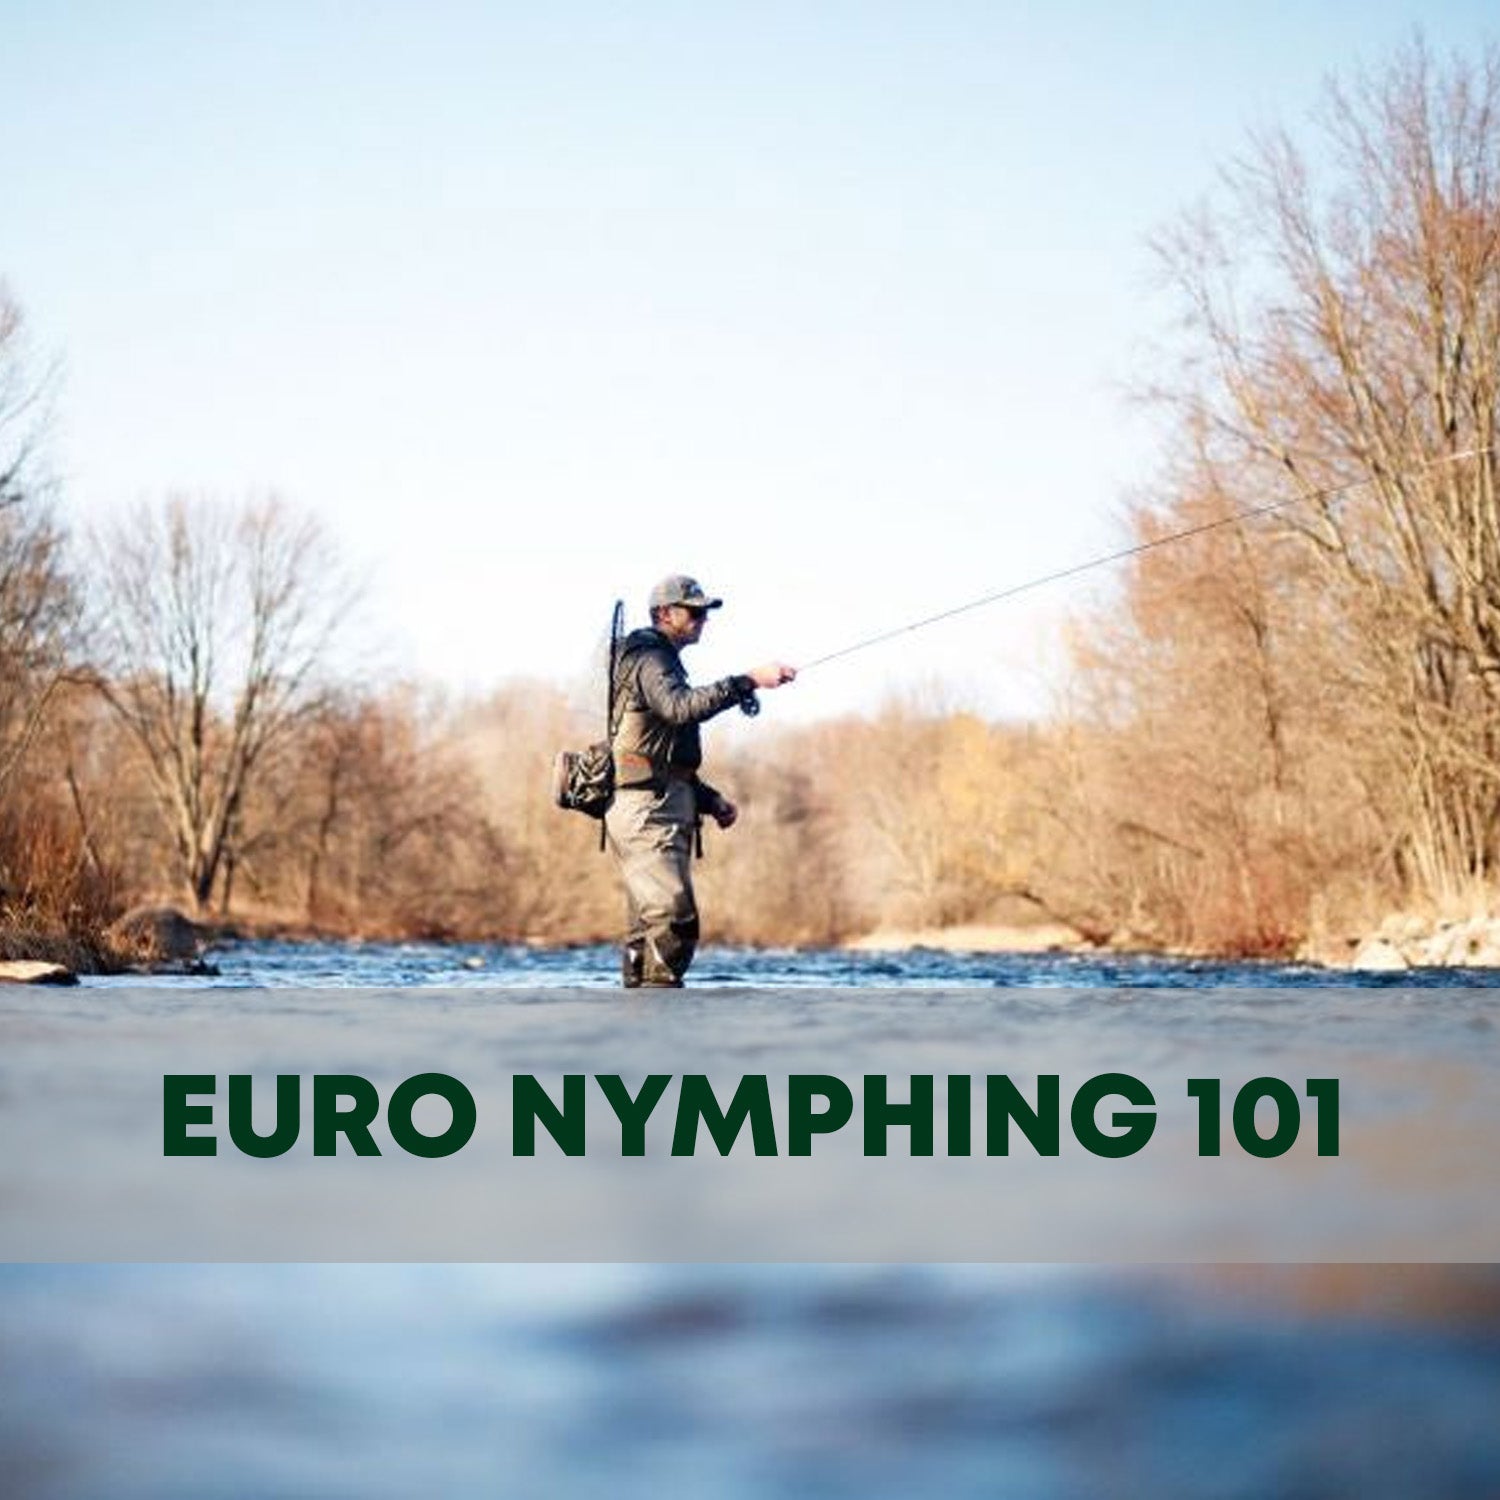 Learn to Euro Nymph, Free Euro Nymphing 101 Class